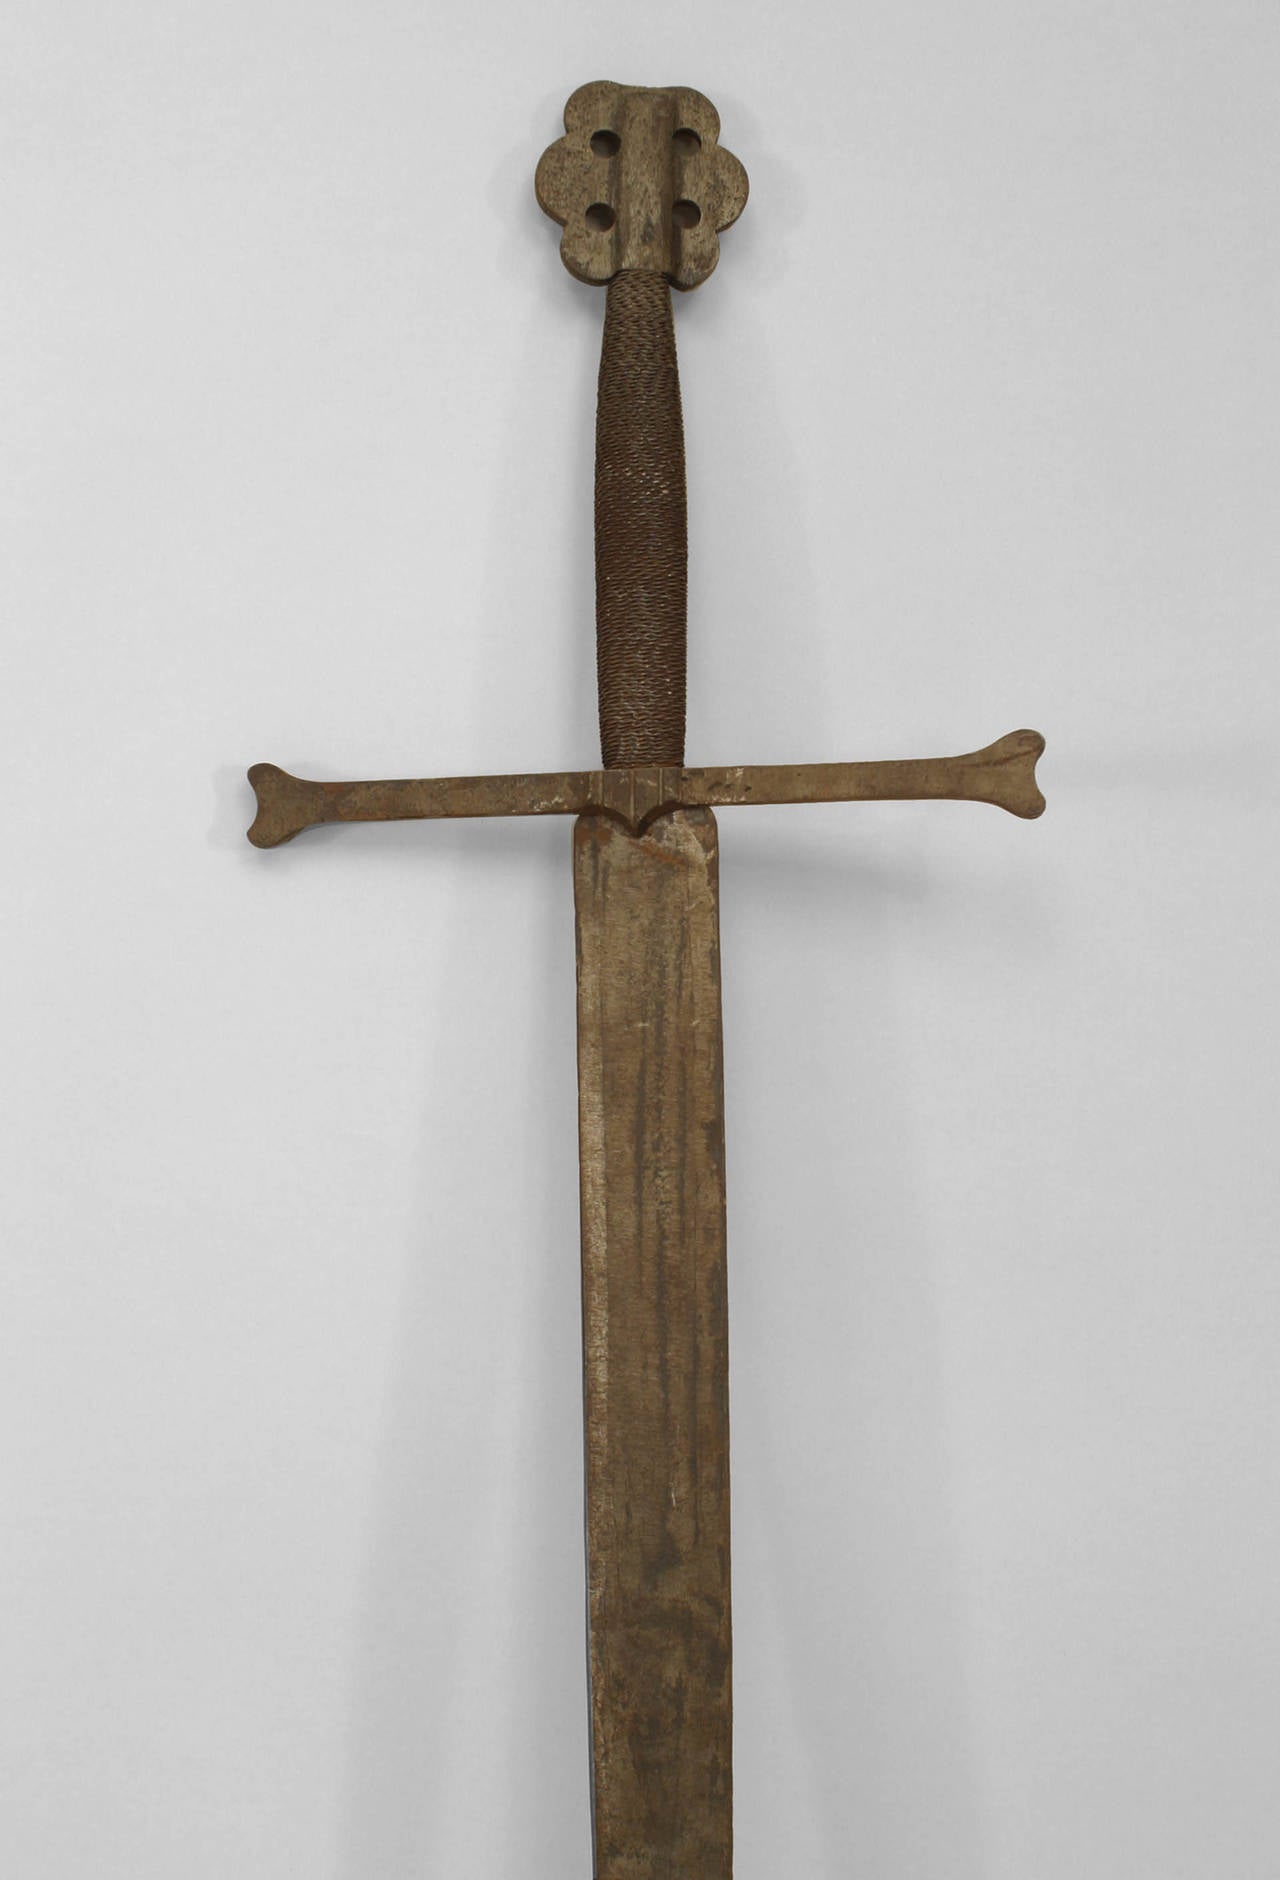 English Renaissance-style large iron longsword with cross design and woven handle
